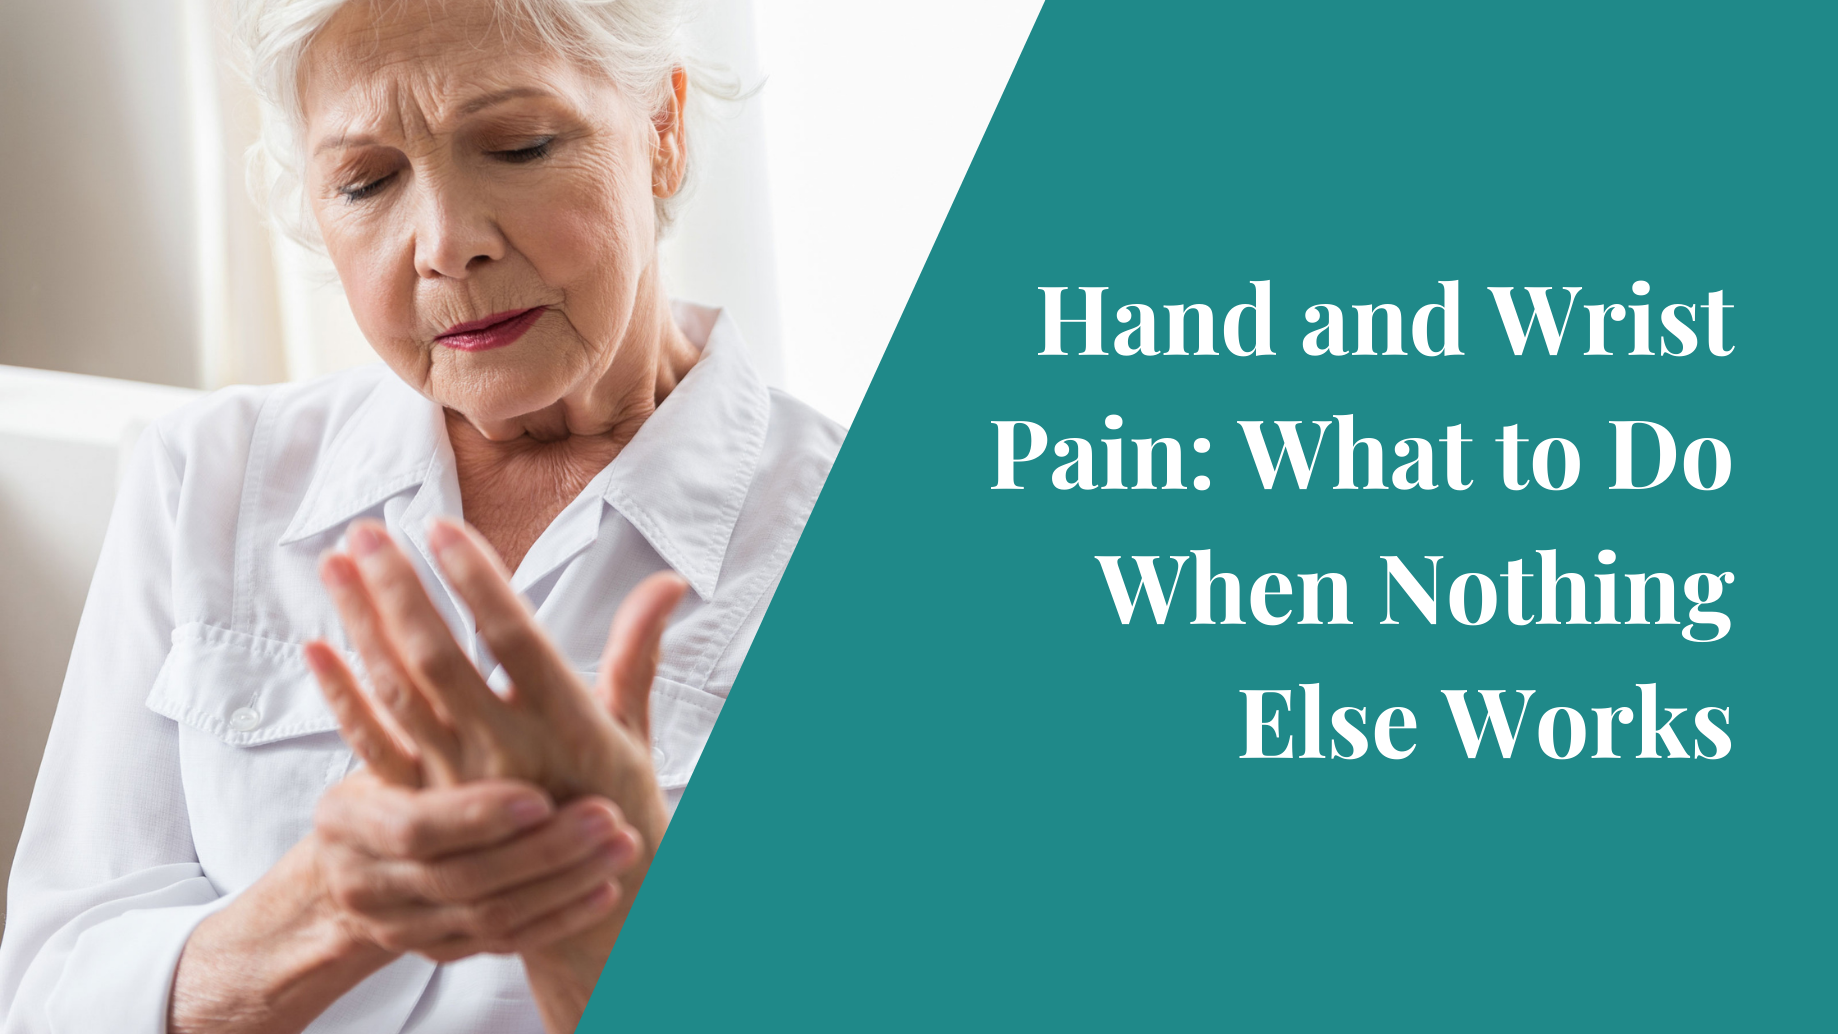 Hand and Wrist Pain: What to Do When Nothing Else Works